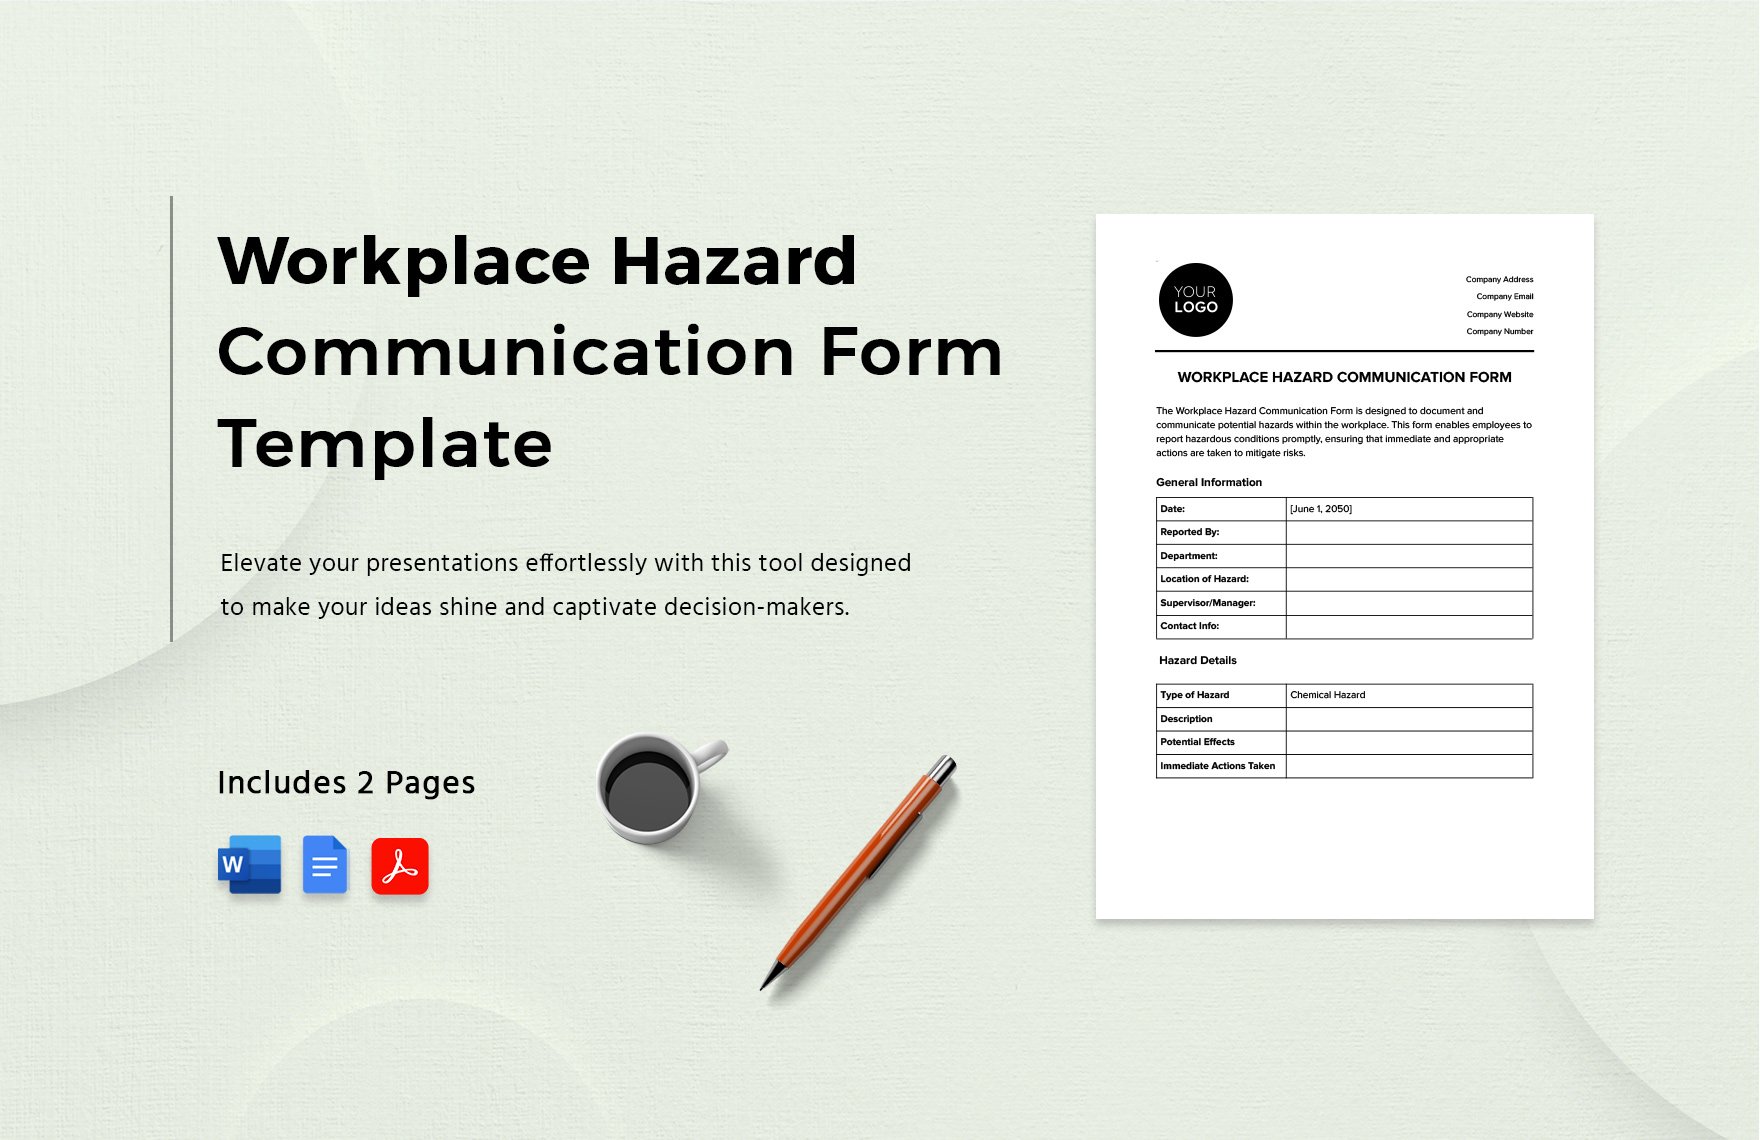 Workplace Hazard Communication Form Template in Word, Google Docs, PDF